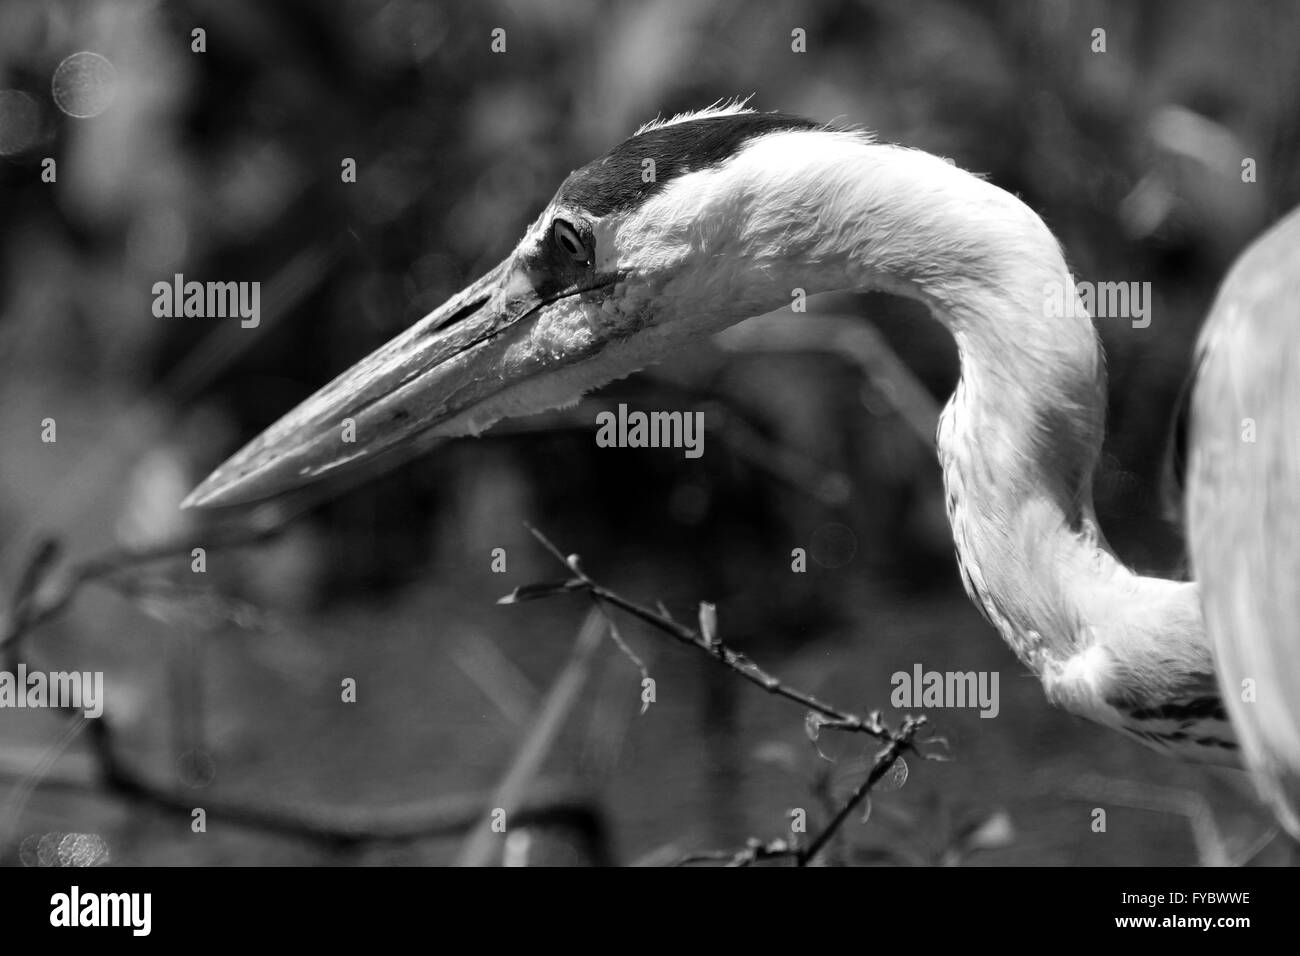 Close in on the head and neck of a Heron in Florida, USA. You can see the binocular eyes of the bird. April 2016 Stock Photo